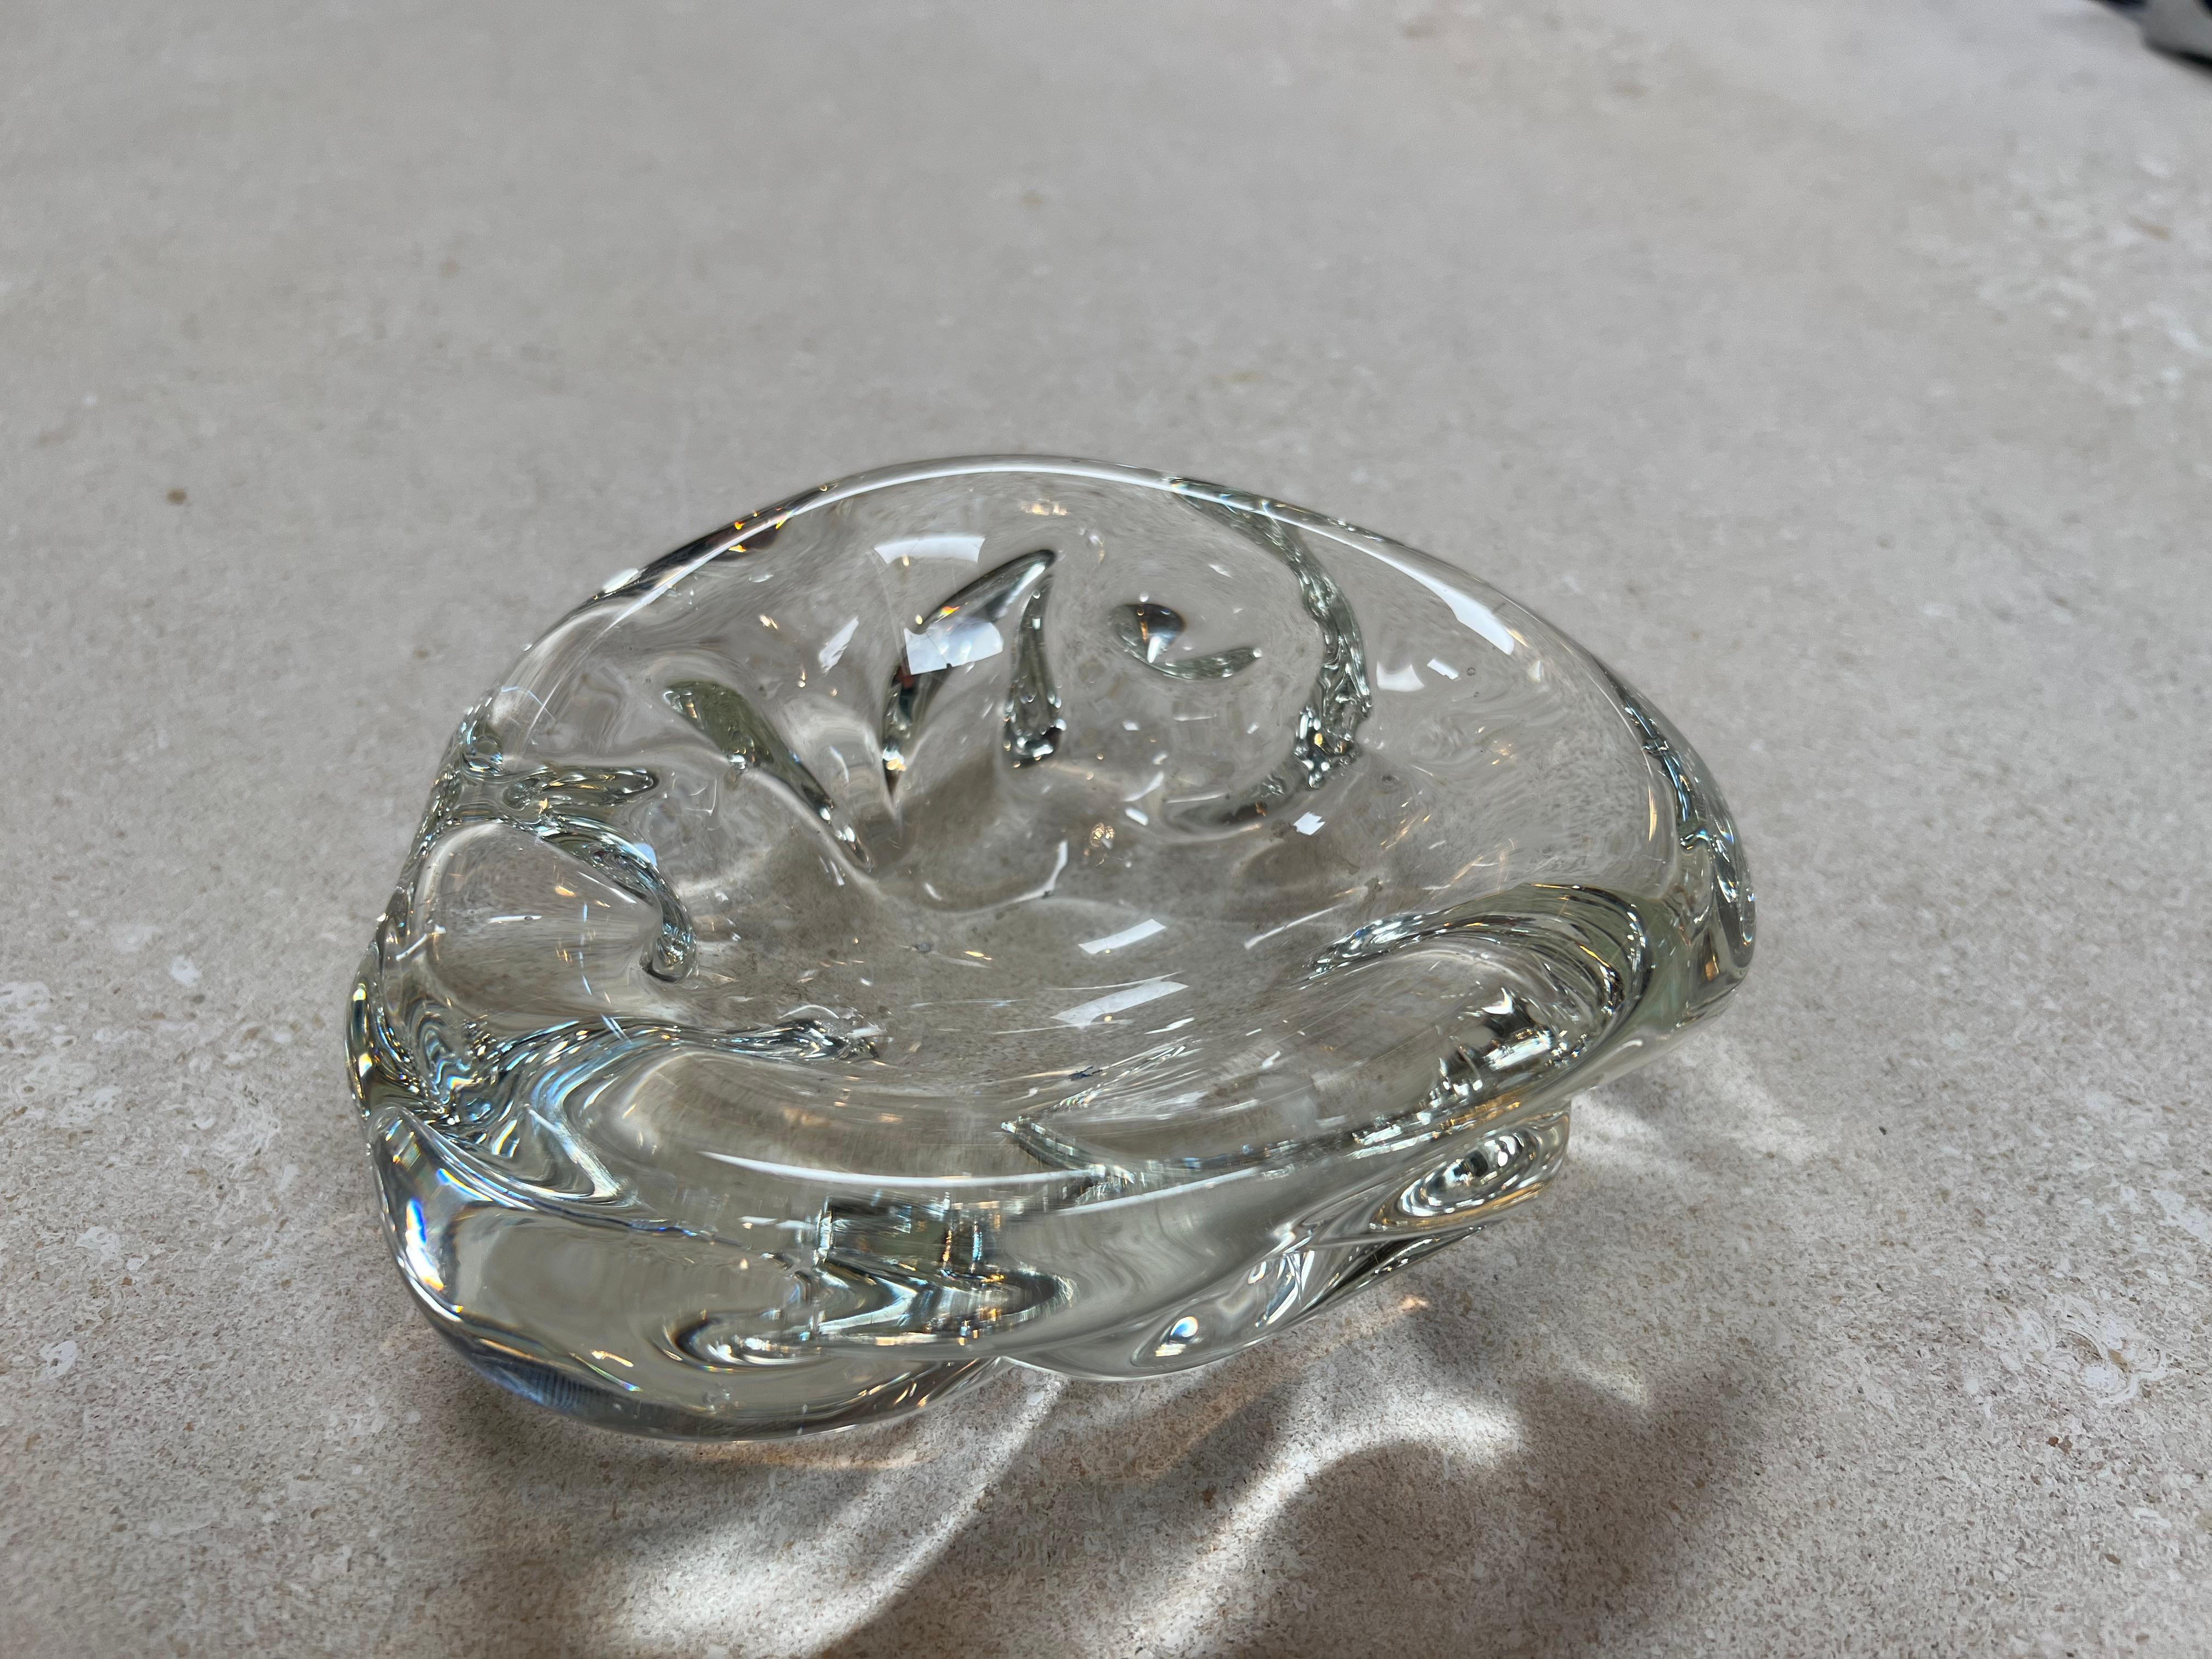 The Vintage Decorative Small Glass Shell Bowl from the 1960s exudes a delicate and charming aesthetic. Crafted in the shape of a shell, this bowl captures the essence of ocean-inspired beauty. The glass material lends it a sense of transparency and